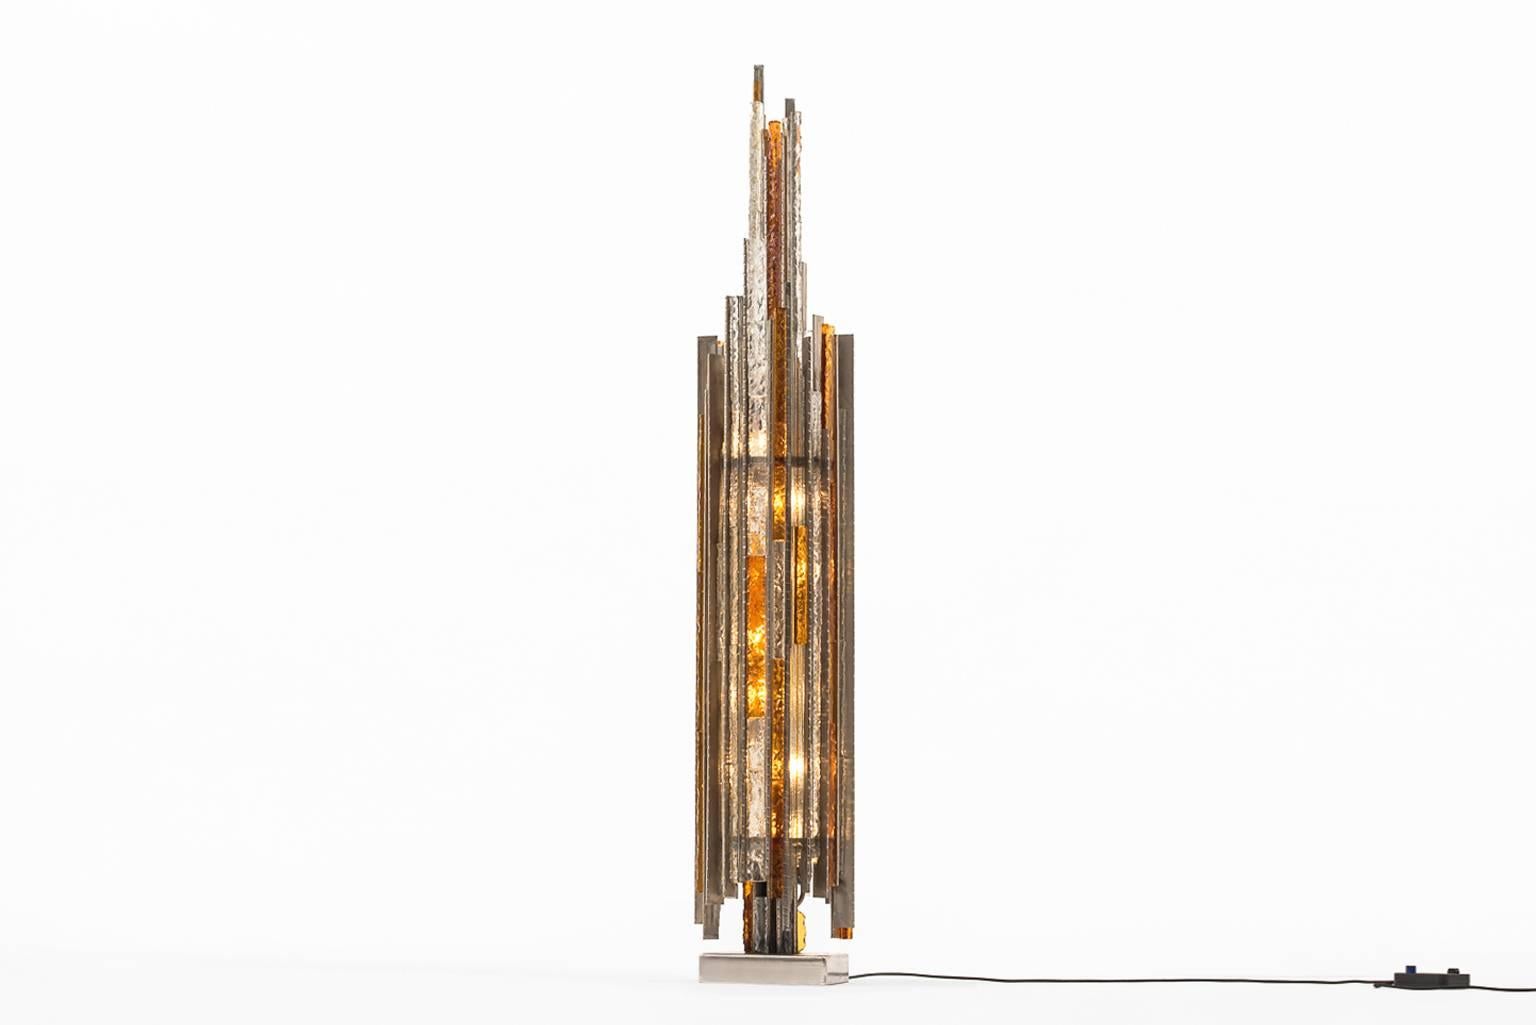 Exceptional floor lamp by Poliarte, Italy 1970s. Made from clear and amber colored Murano glass, all handcrafted with each their own unique structure.
The lamp is demountable; two separate parts are seamlessly hanged to the metal frame. Provided